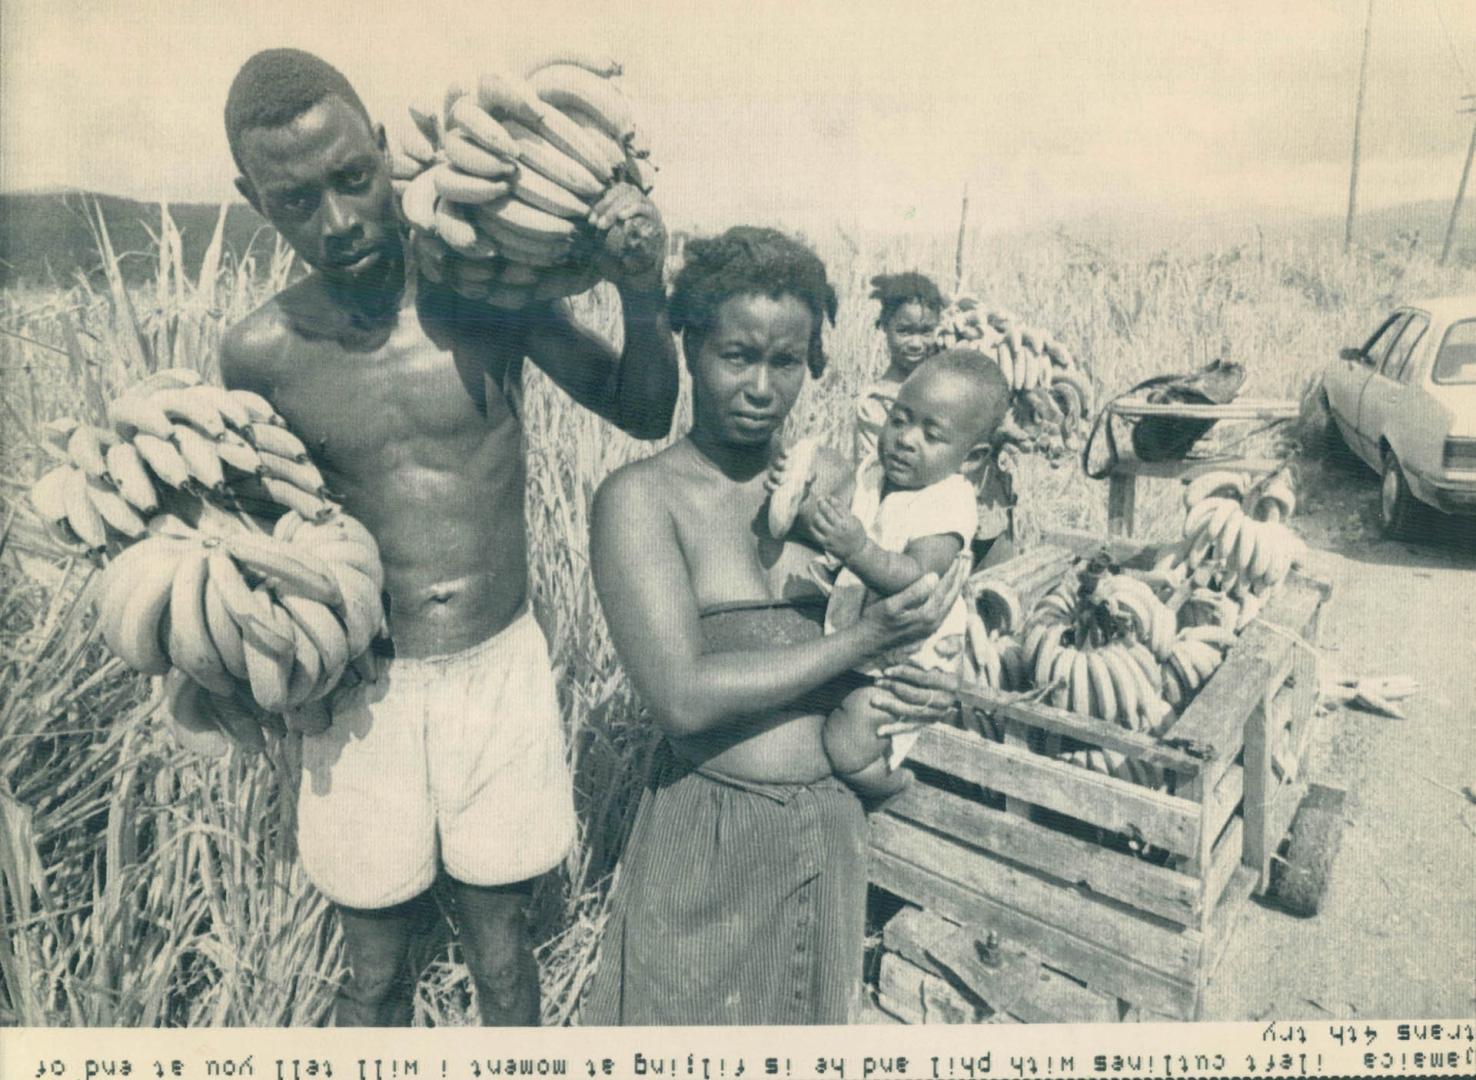 Gathering food: Donovan Thomas, his wife Marcia Deans and their children Rosealet, 11, and Marvin, 7 months, gather bananas from the fields ravaged by Hurricane Gilbert